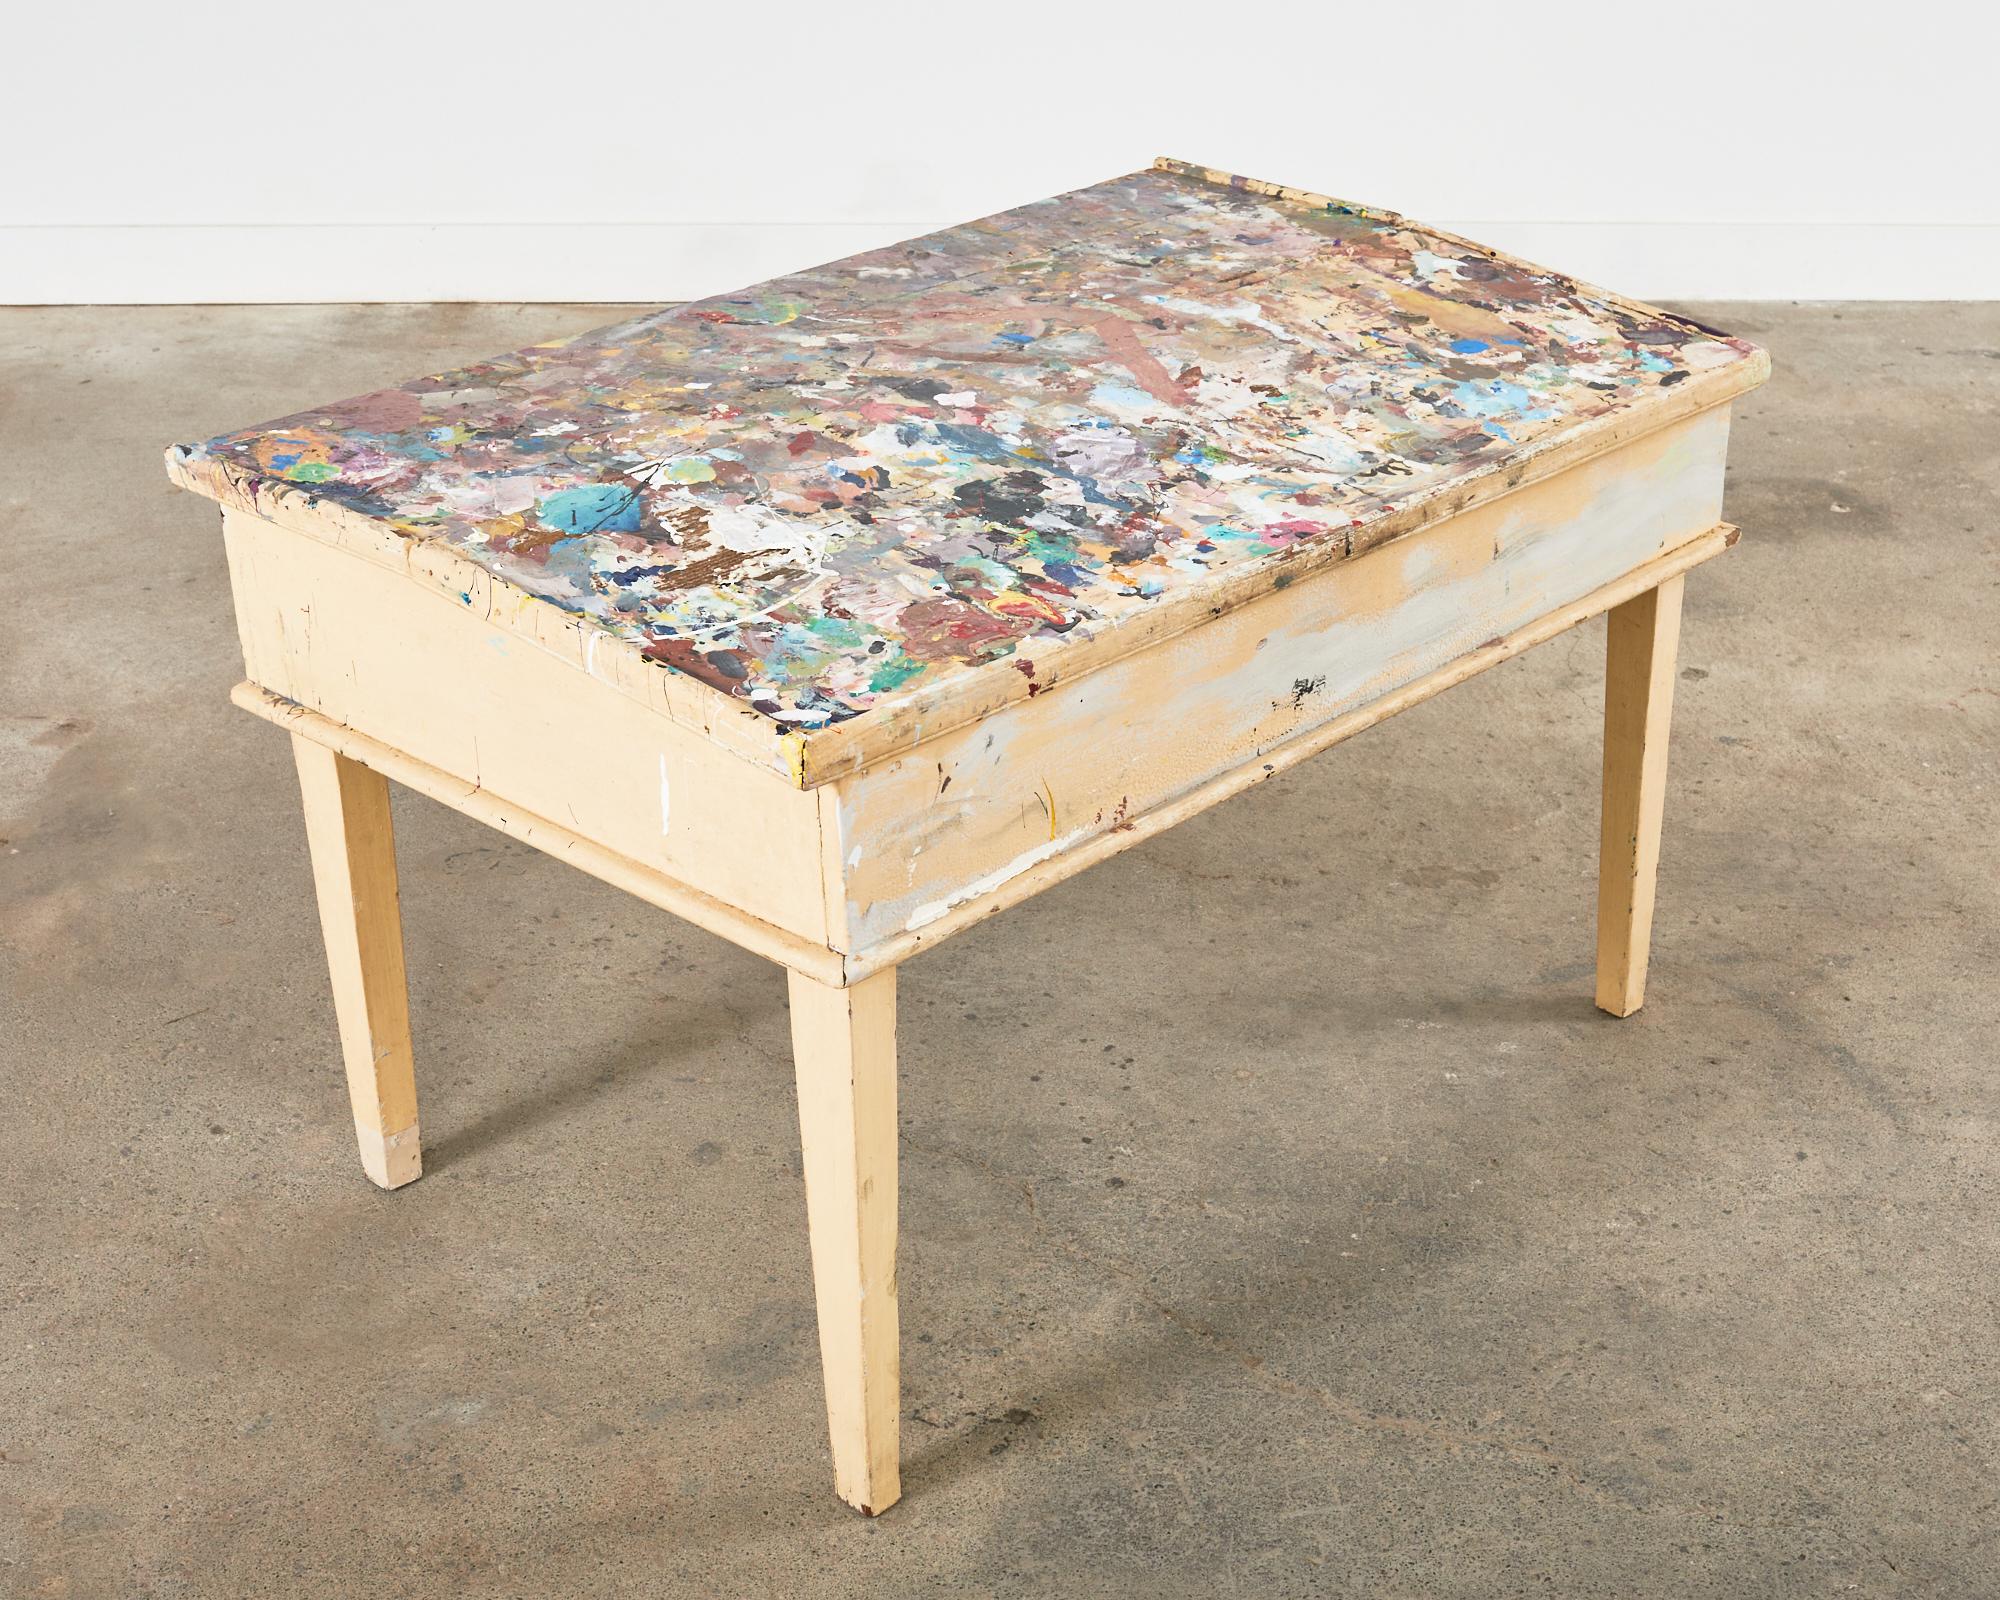 Wood Artist Ira Yeager's Studio Painting Palette Work Table For Sale